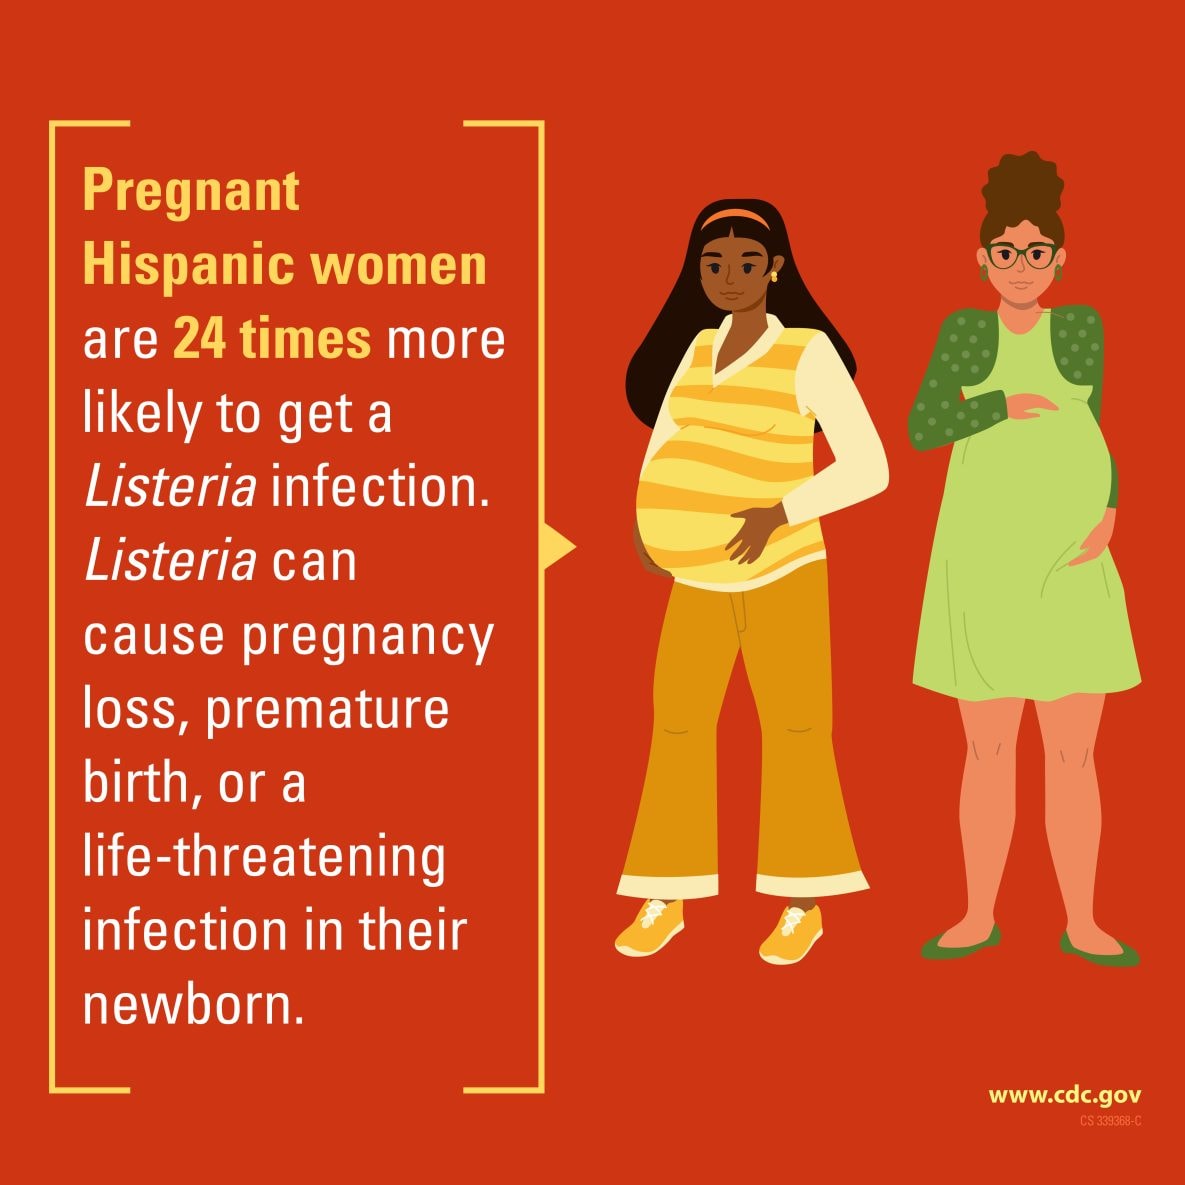 Pregnant Hispanic women are 24 times more likely to get a Listeria infection.